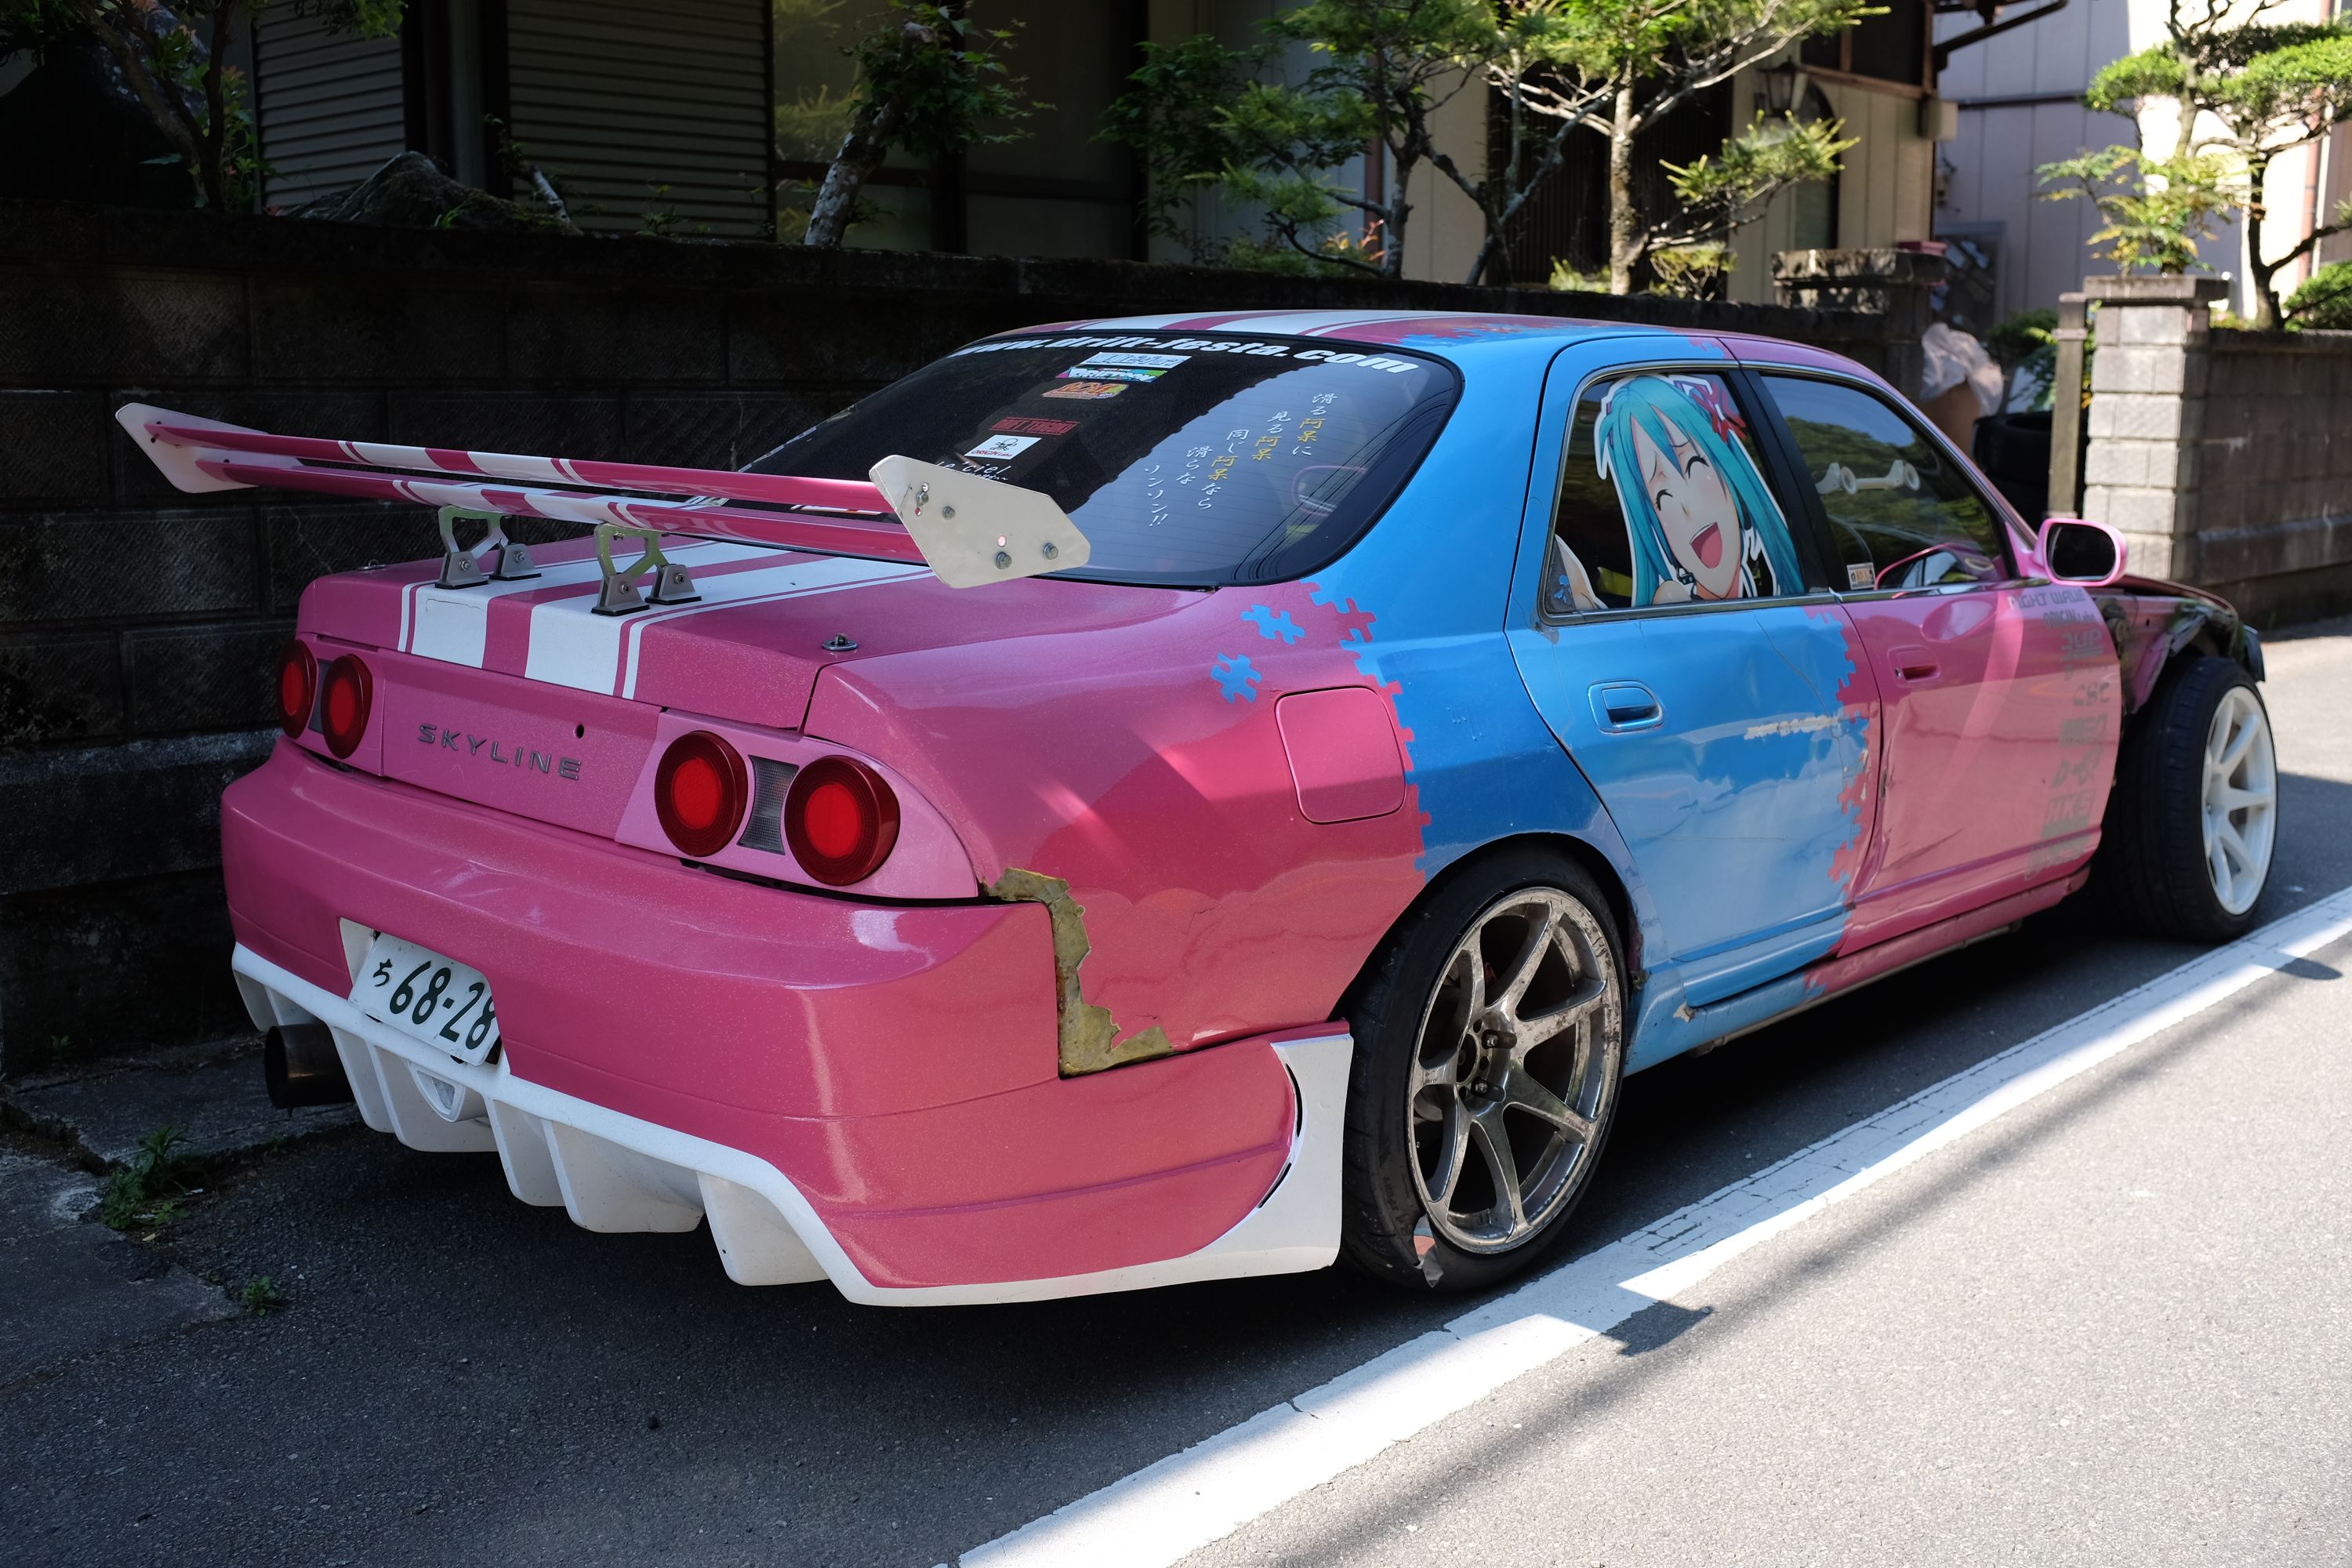 The pink rear end of the car has a huge aftermarket wing.